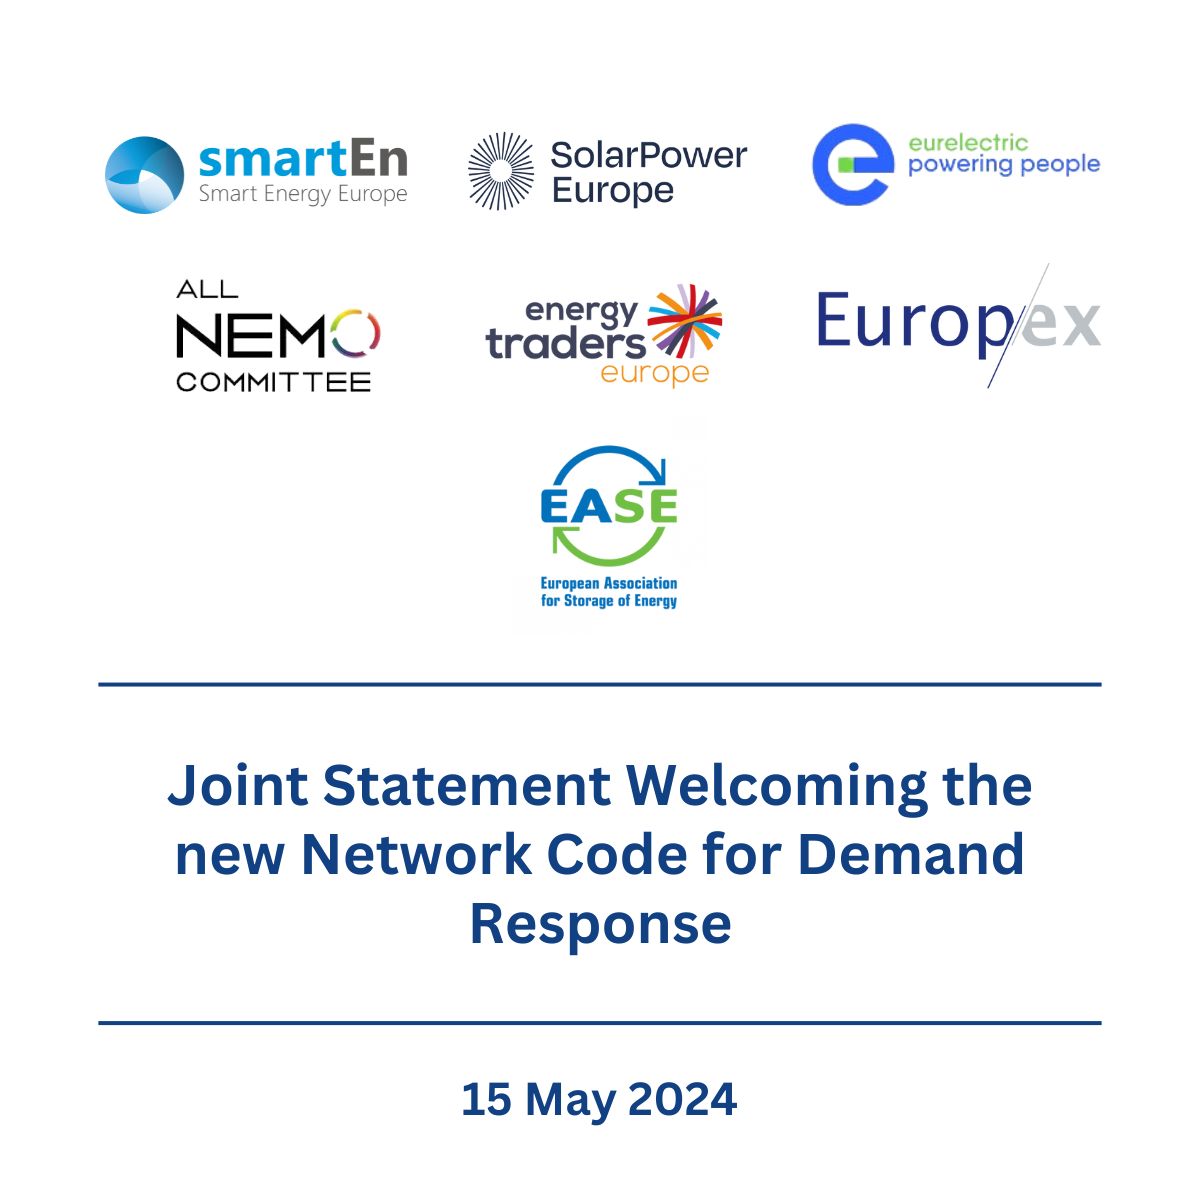 Together with @SolarPowerEU, @Eurelectric, @Europex_energy, @EASE_ES, All NEMO Committee & Energy Traders Europe,  we welcome the new #DemandResponse #NetworkCode drafted by @ENTSO_E & @DSOEntity_eu!
🔗smarten.eu/joint-statemen…
1/2